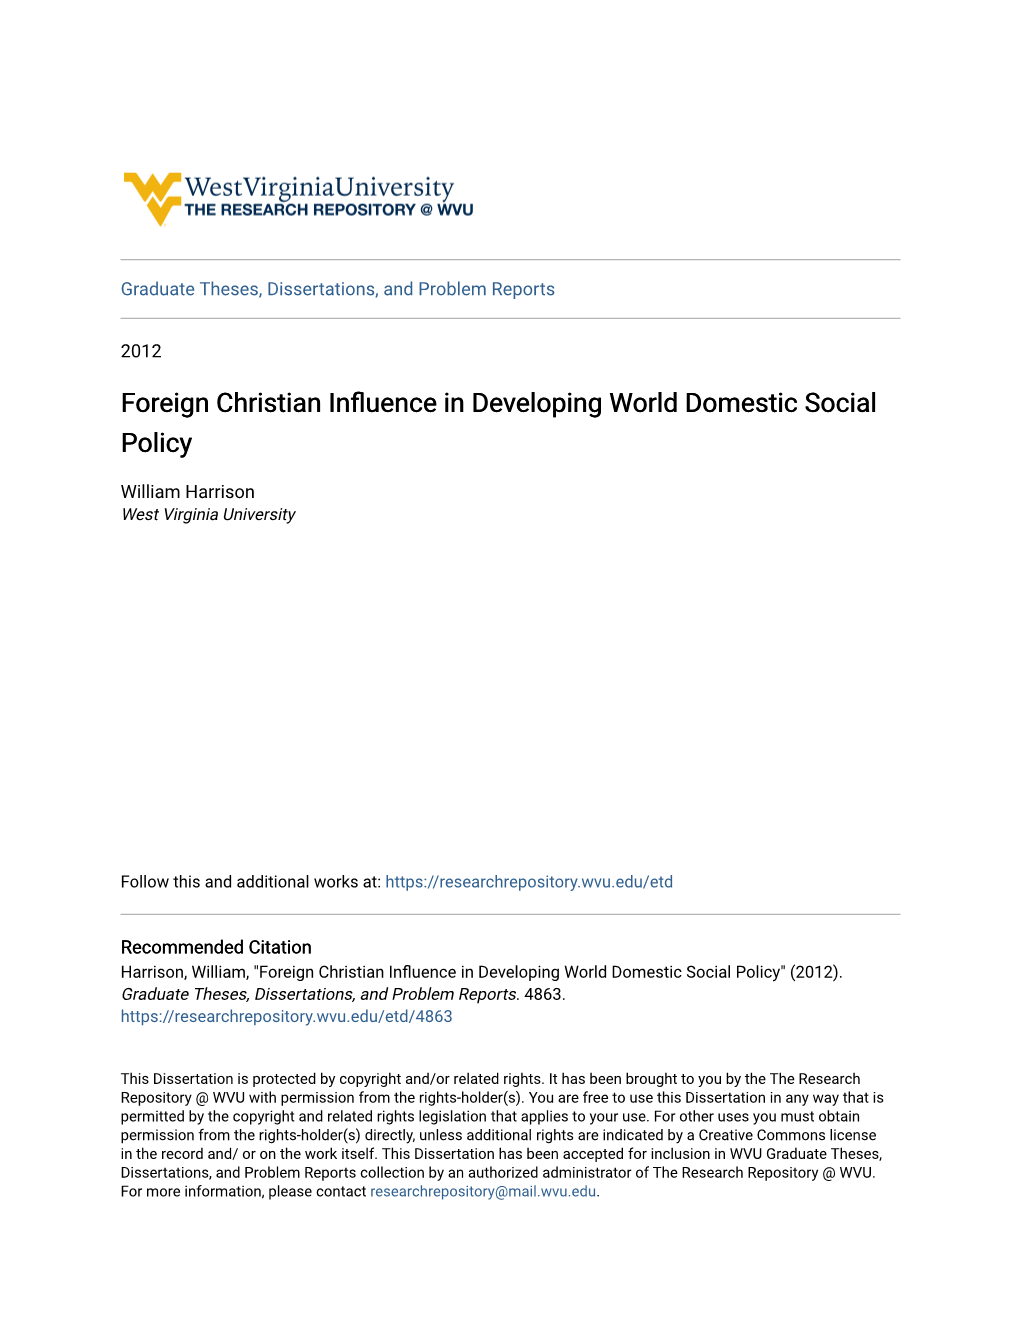 Foreign Christian Influence in Developing World Domestic Social Policy